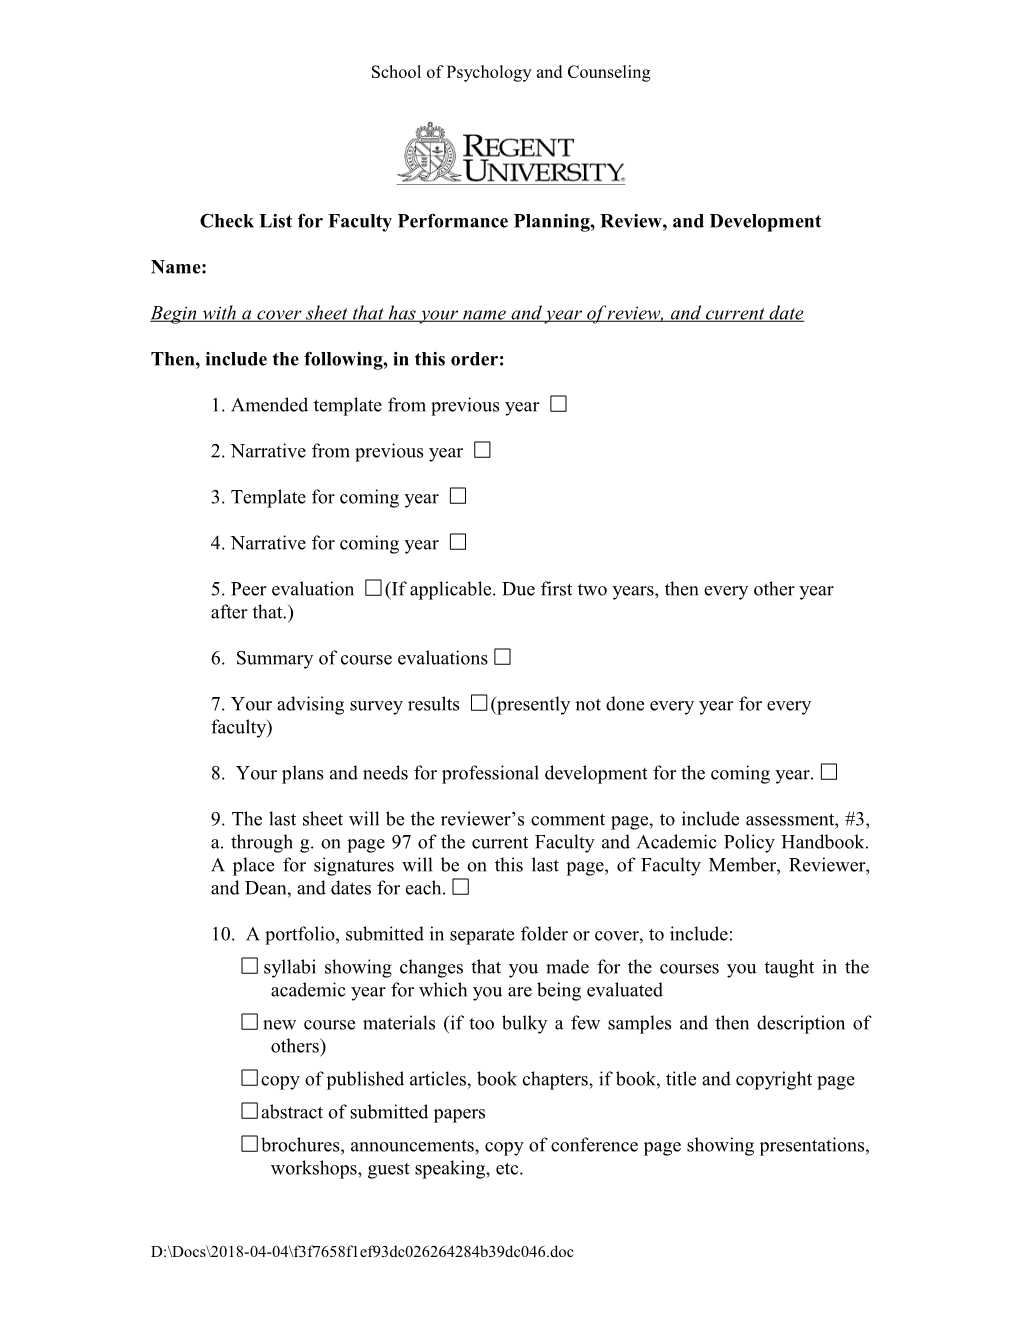 Check Off List for Faculty Performance Planning, Review, and Development